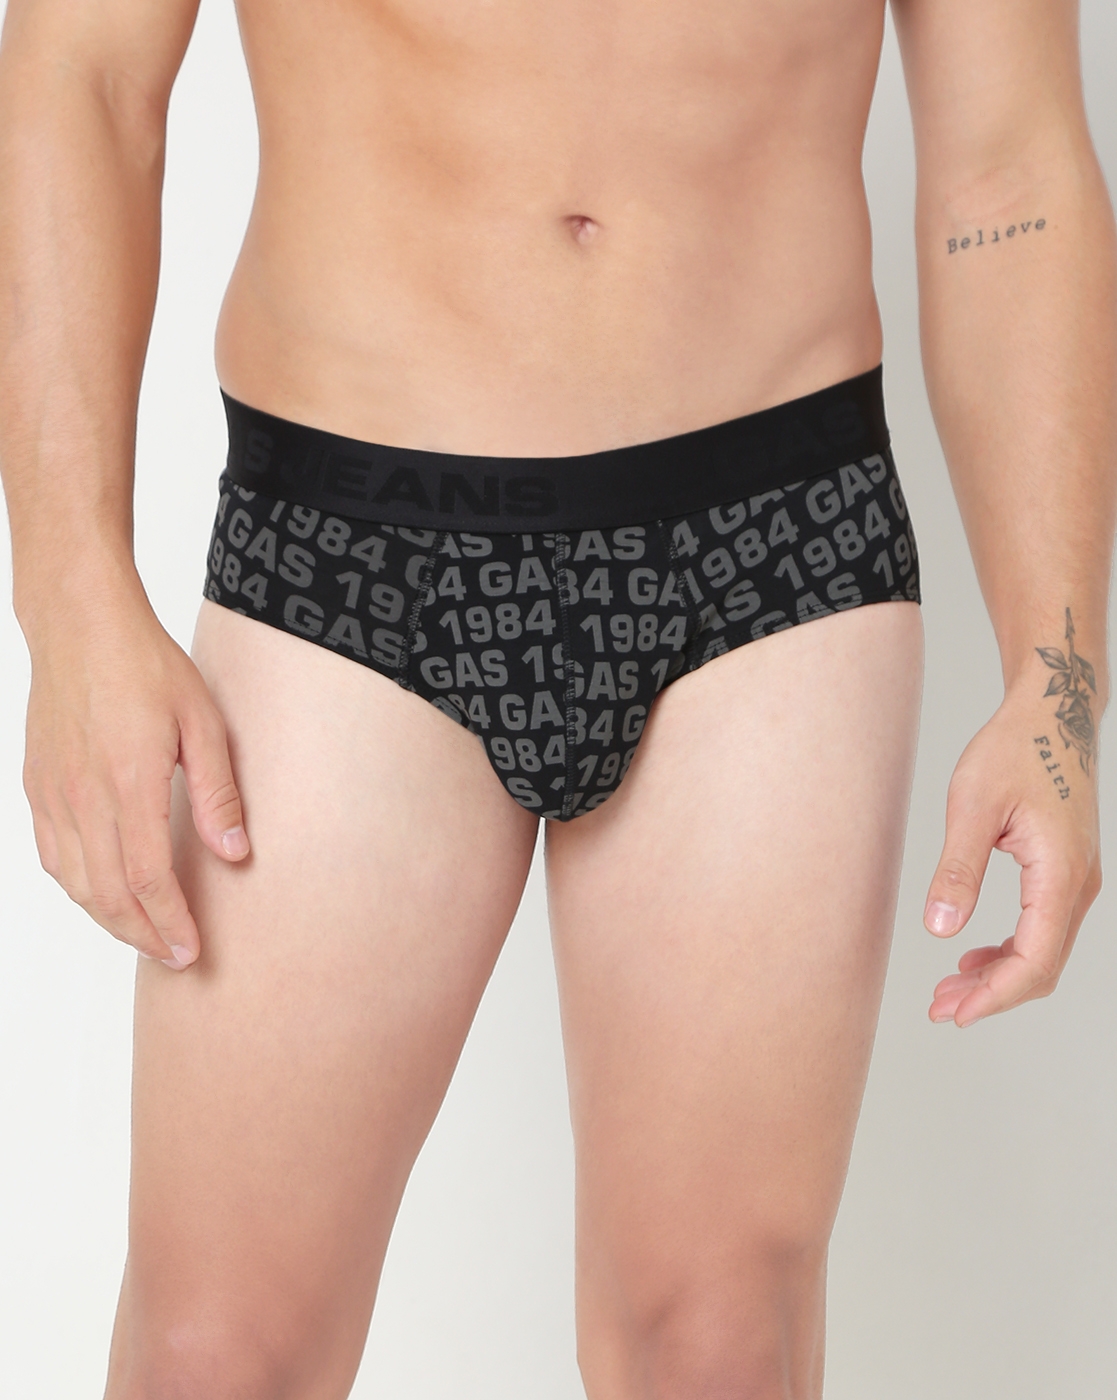 GAS | Abstract Classic Briefs